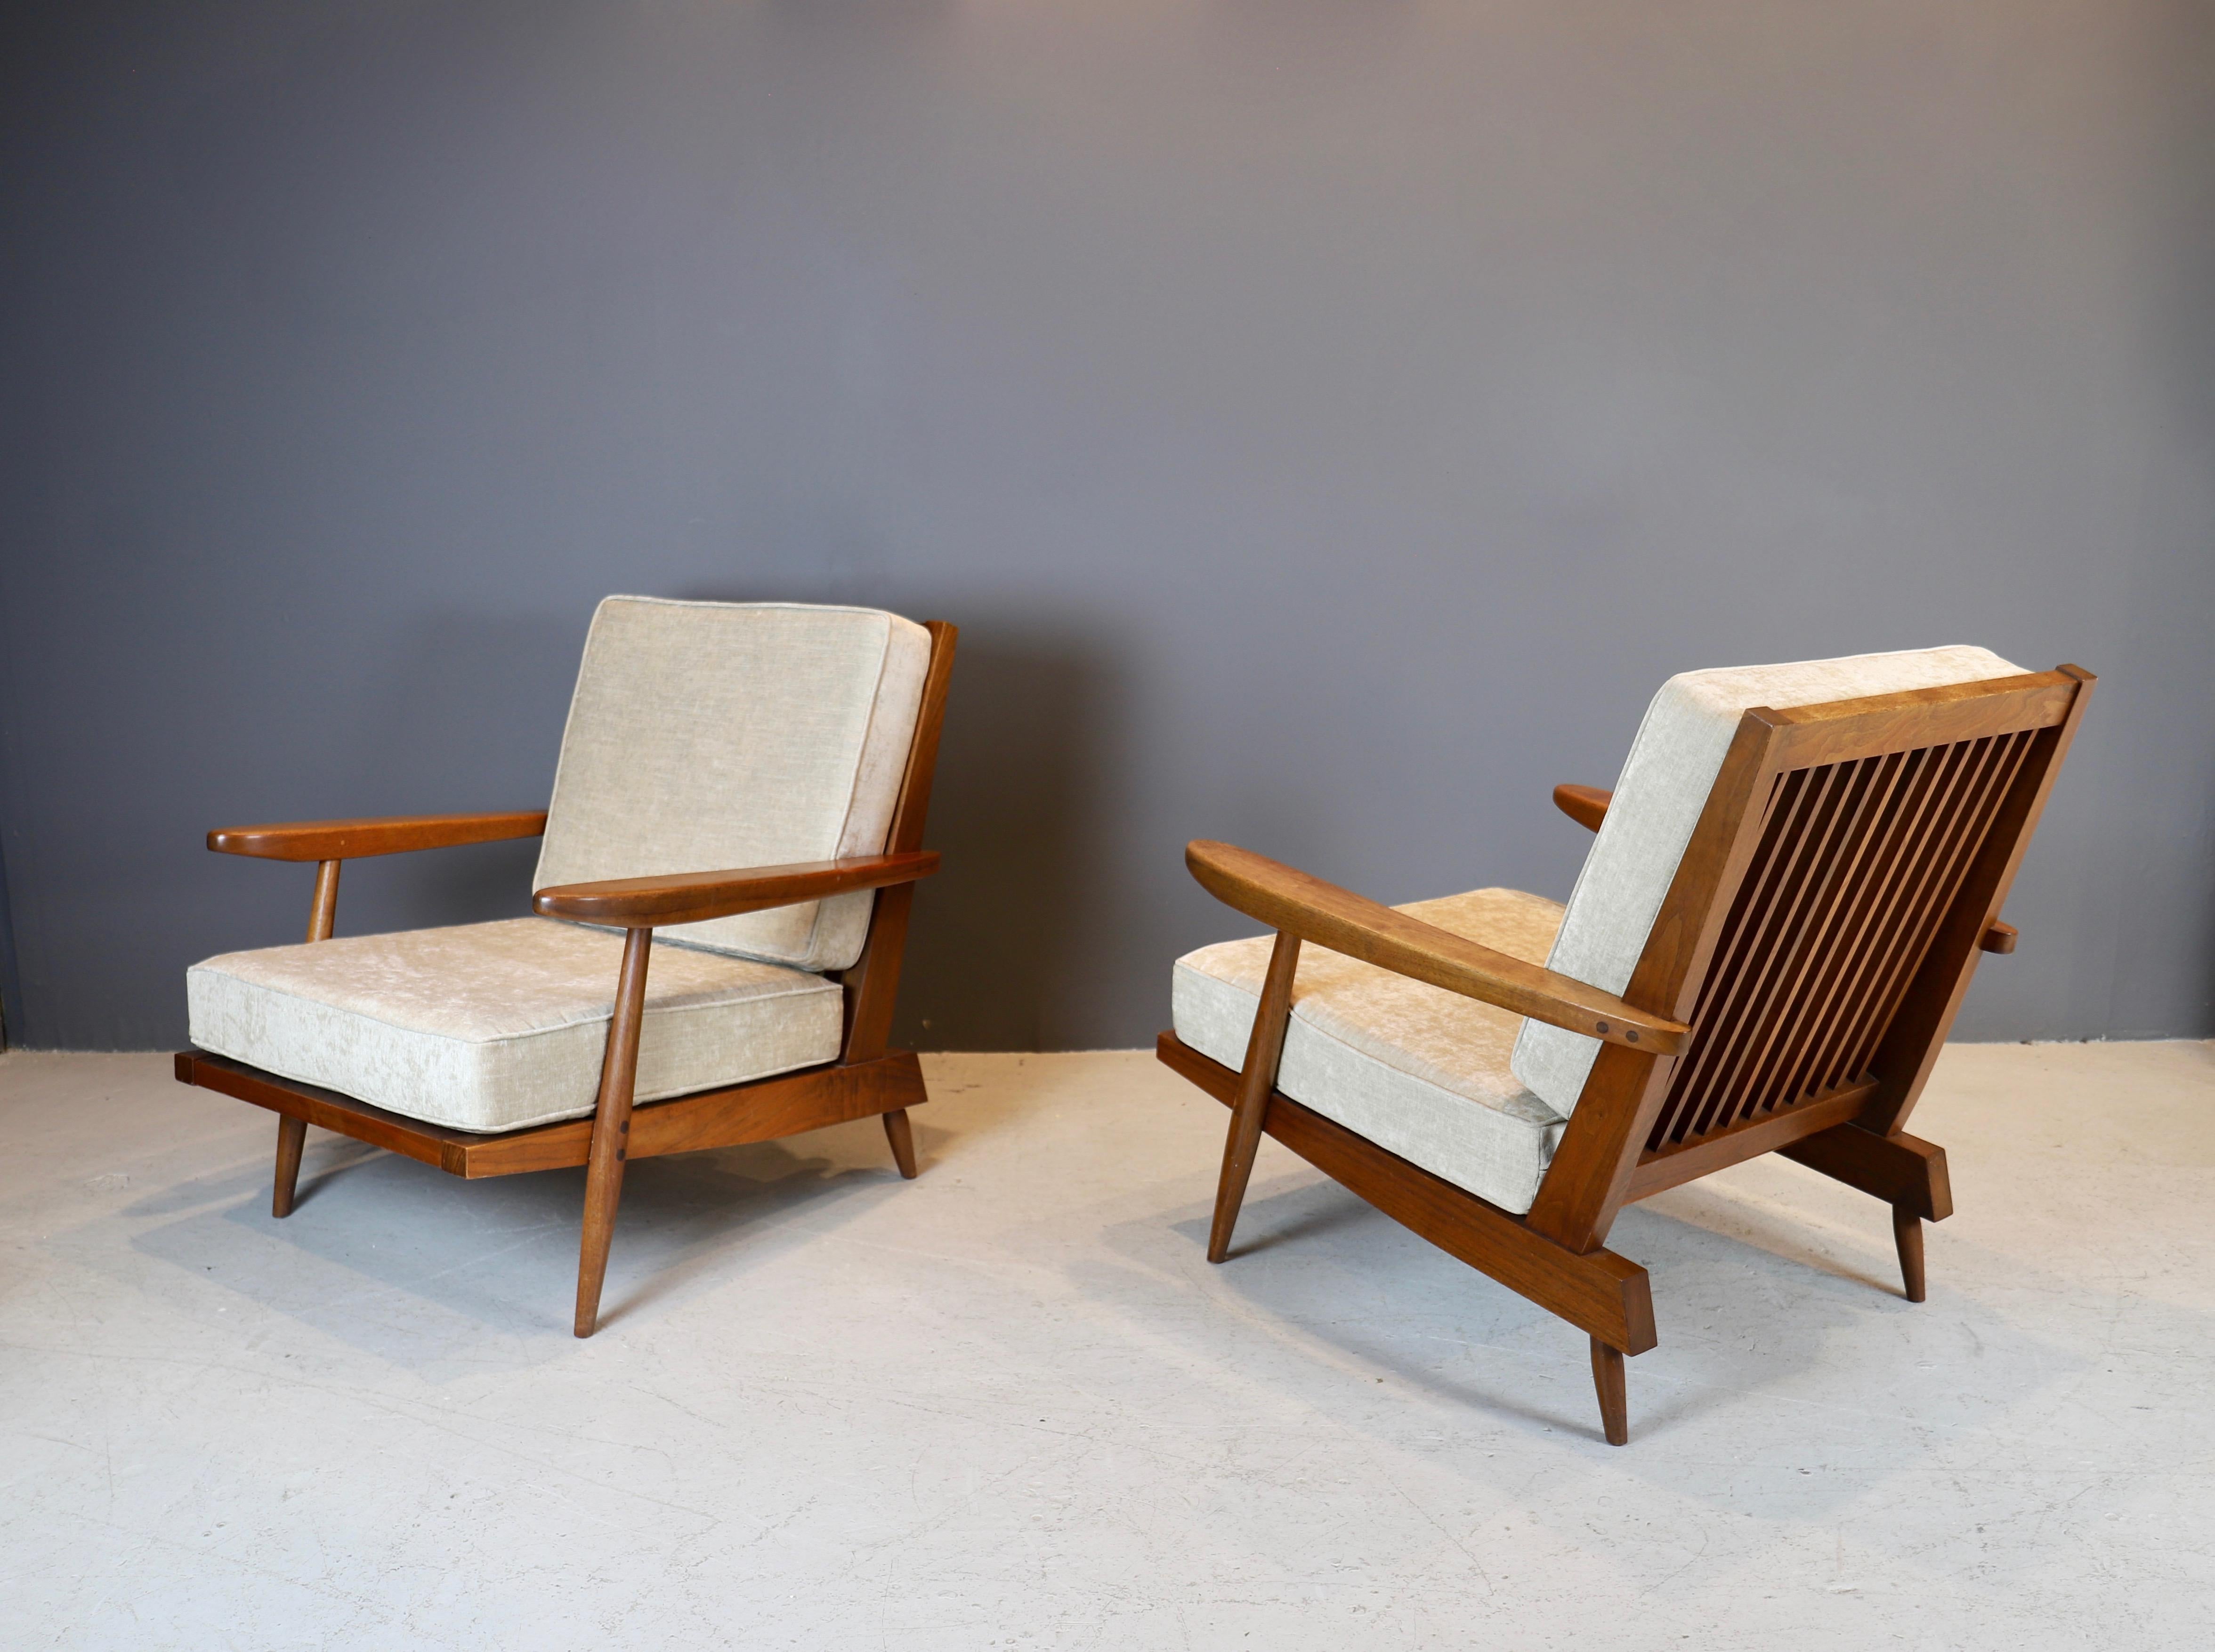 Iconic pair of lounge chairs by Japanese - American studio artist George Nakashima, produced in 1955. Chairs are in American walnut, showing Nakashima's masterful craftsmanship.
Cushions have been newly upholstered in Holly Hunt light sage